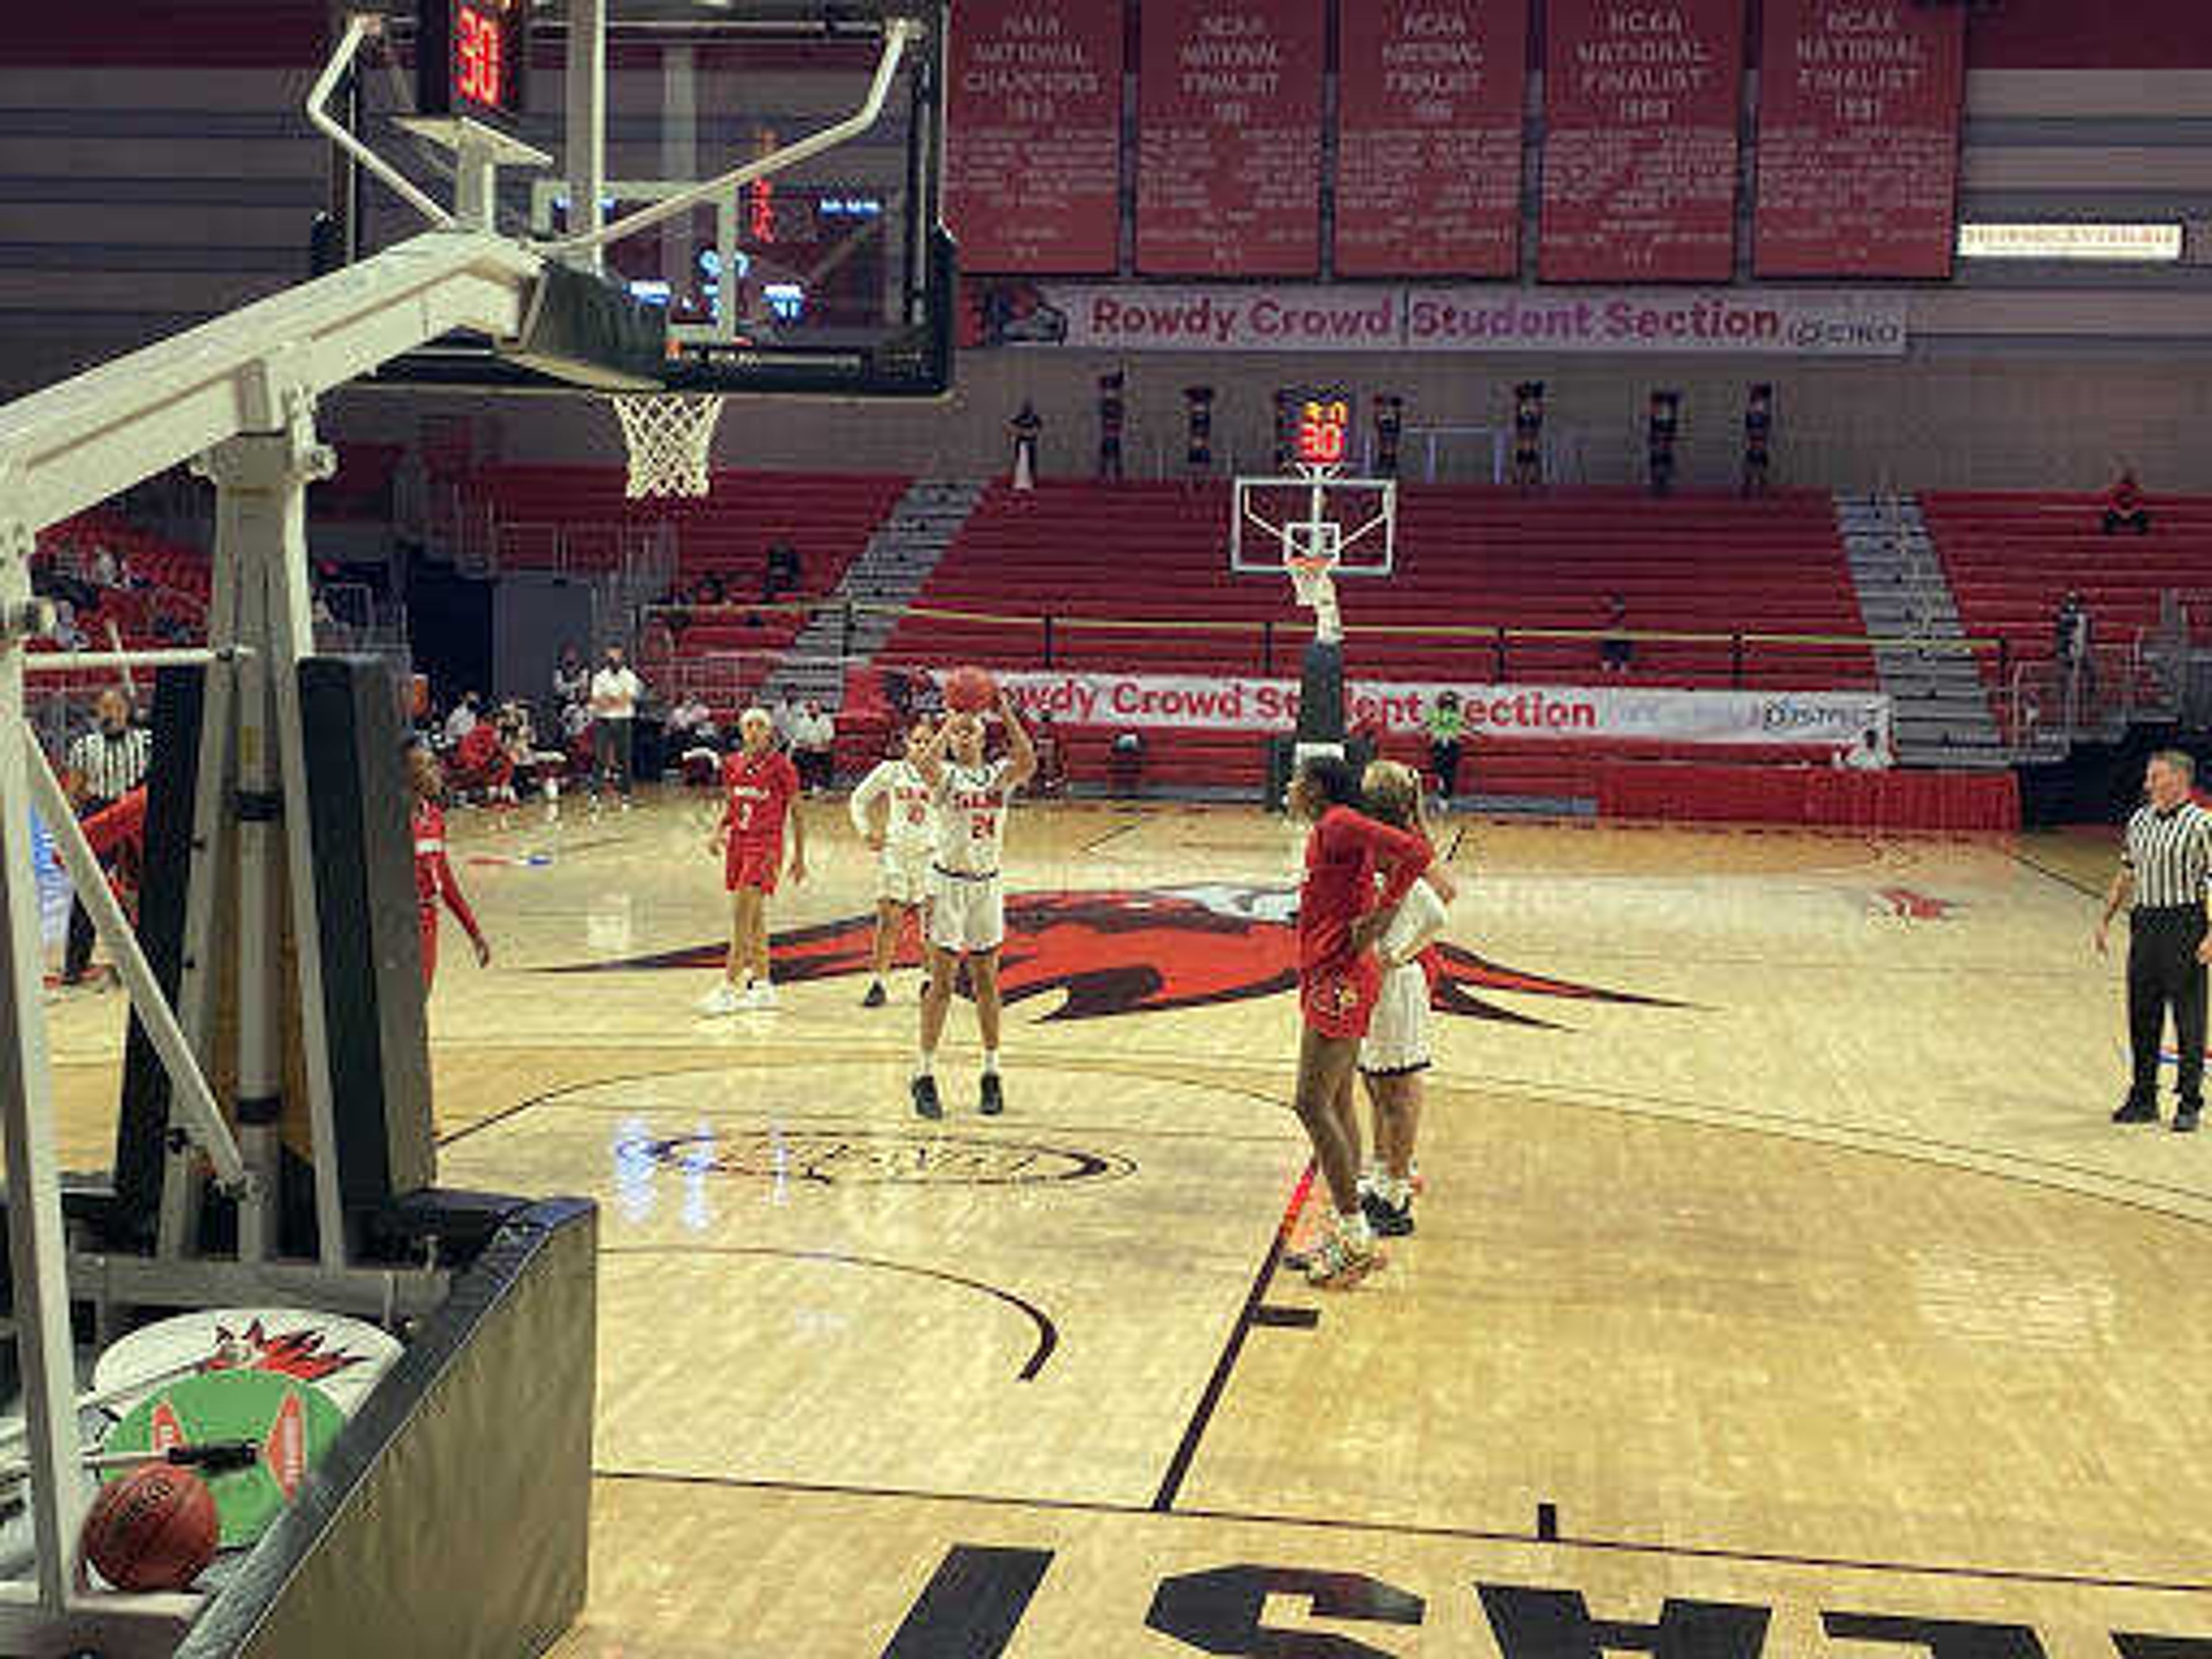 Senior guard Tesia Thompson shoots a free throw during the Redhawks 74-53 loss to the Louisville Cardinals.